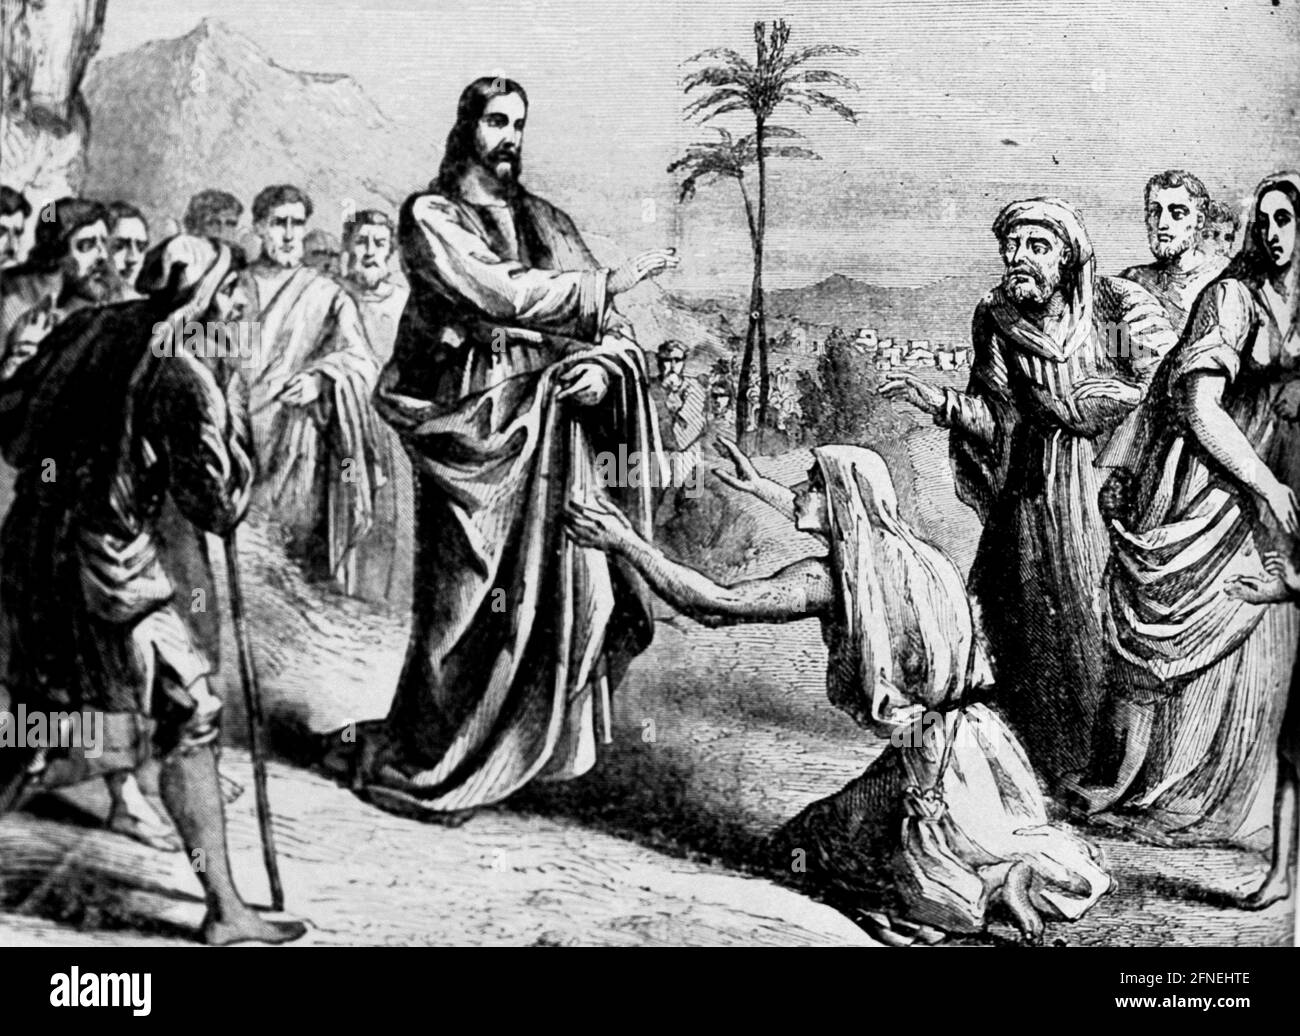 Jesus cleansing a leper is one of the miracles of Jesus. The story is found in all three of the Synoptic Gospels: Matthew 8:1–4, Mark 1:40–45 and Luke 5:12–16. Old lithograph. Stock Photo